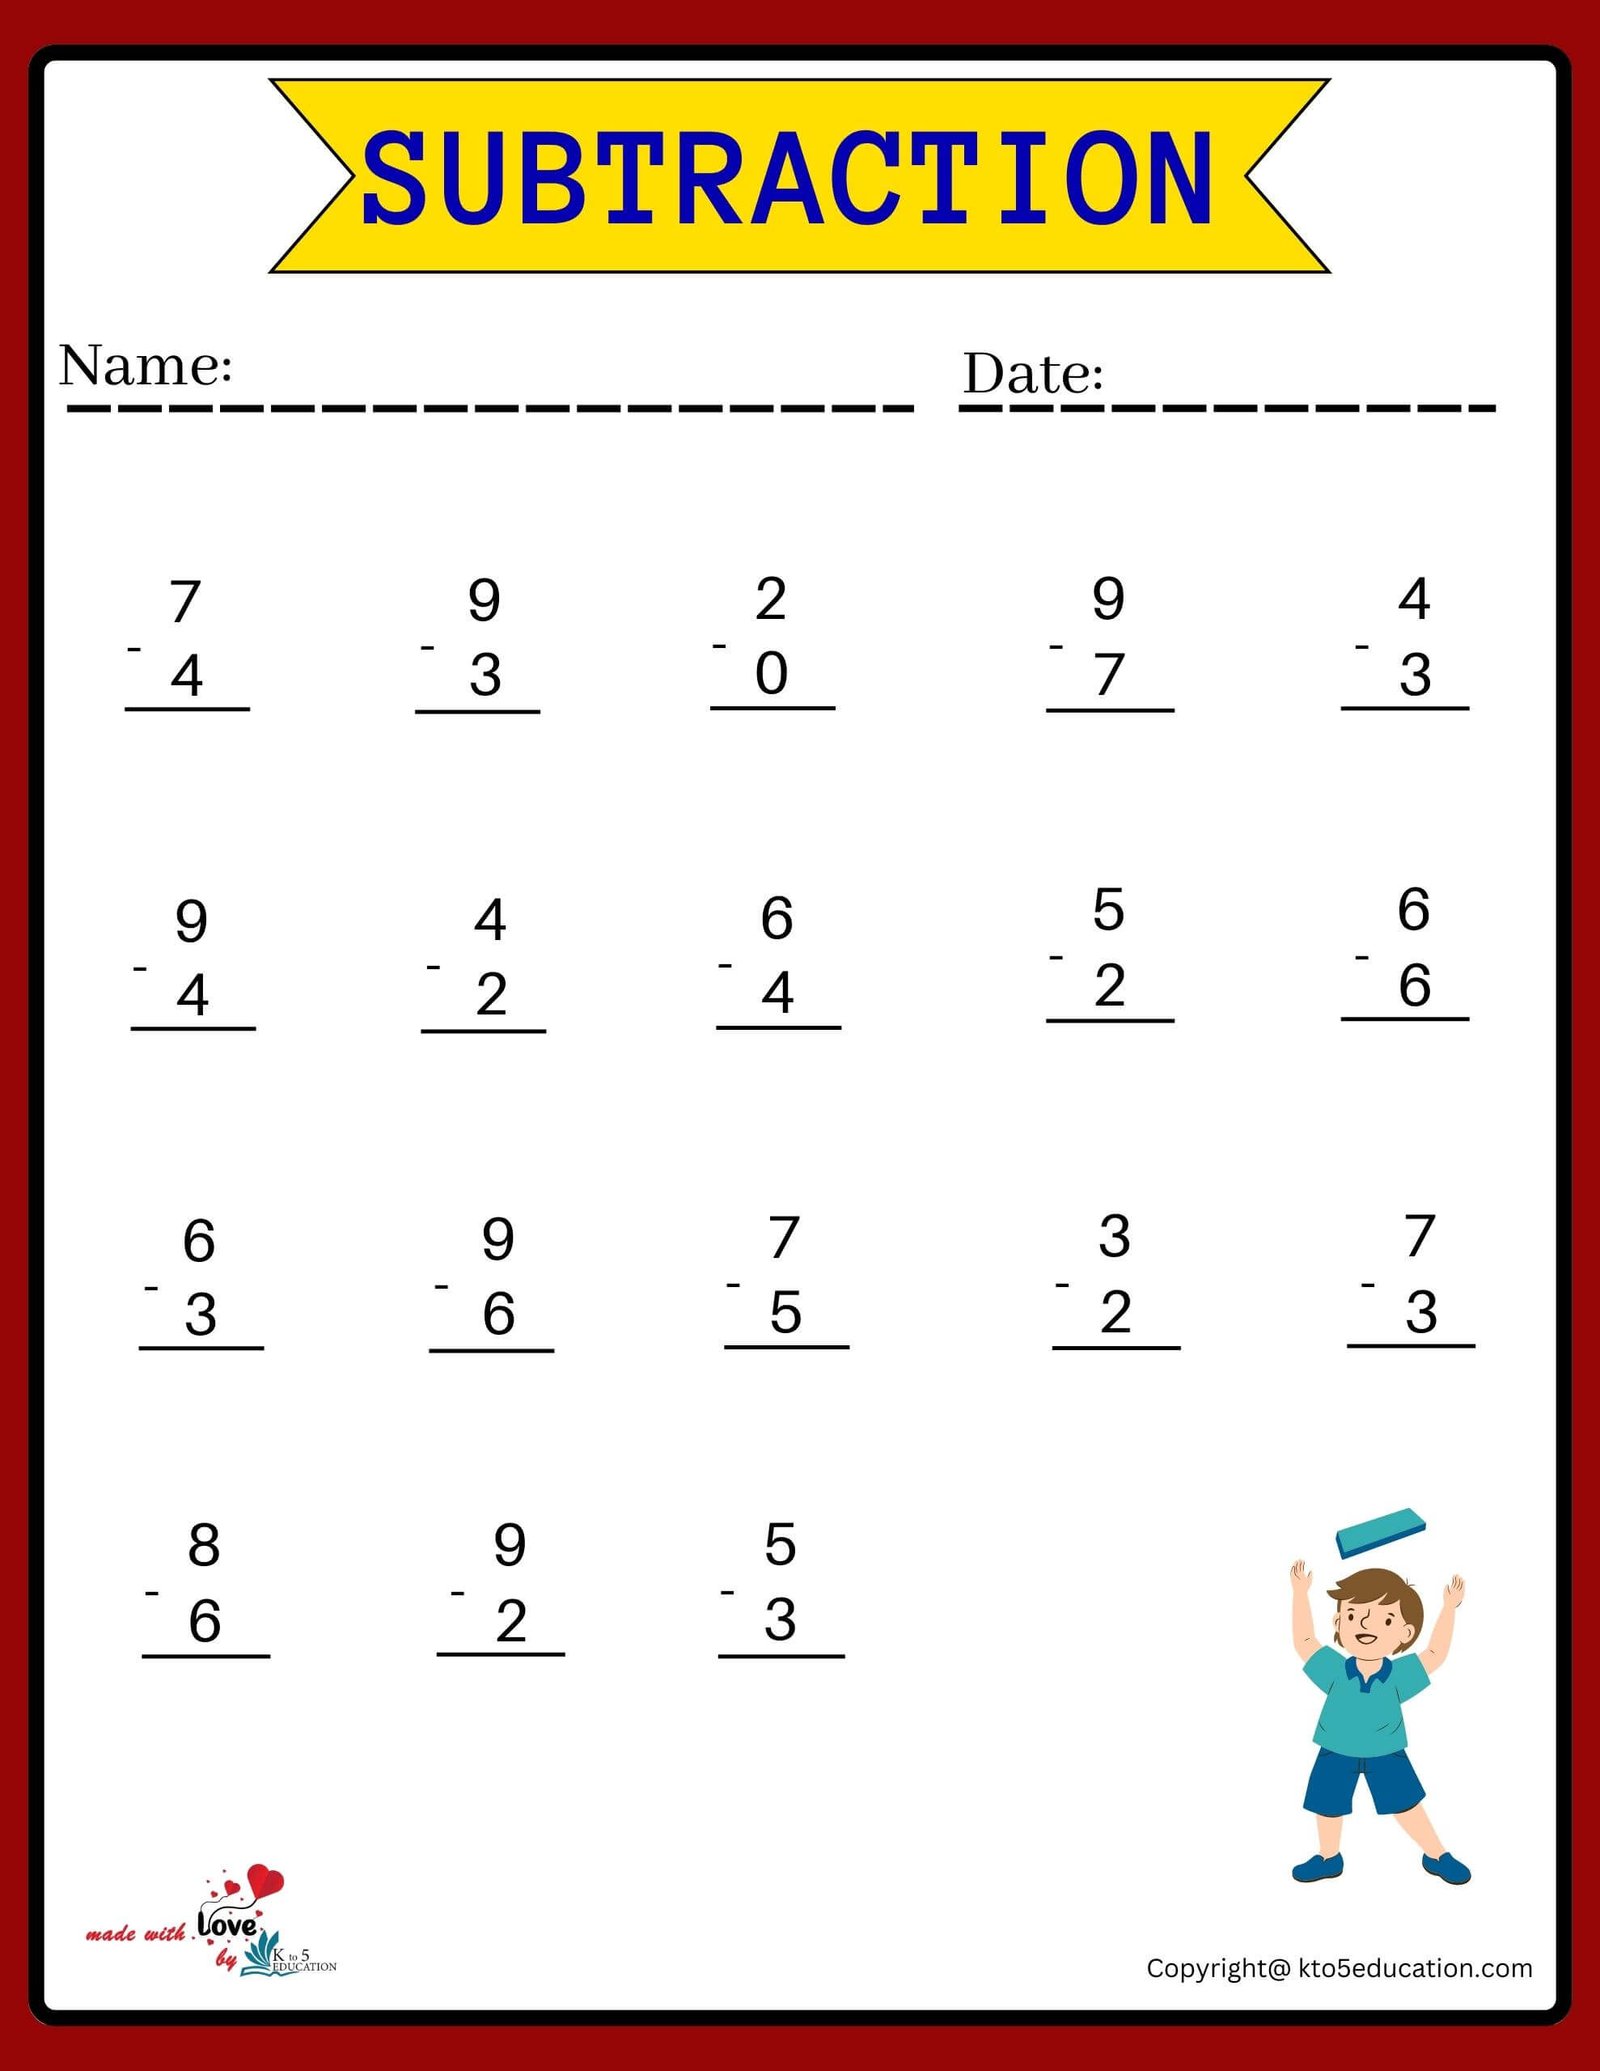 Subtractions Tables